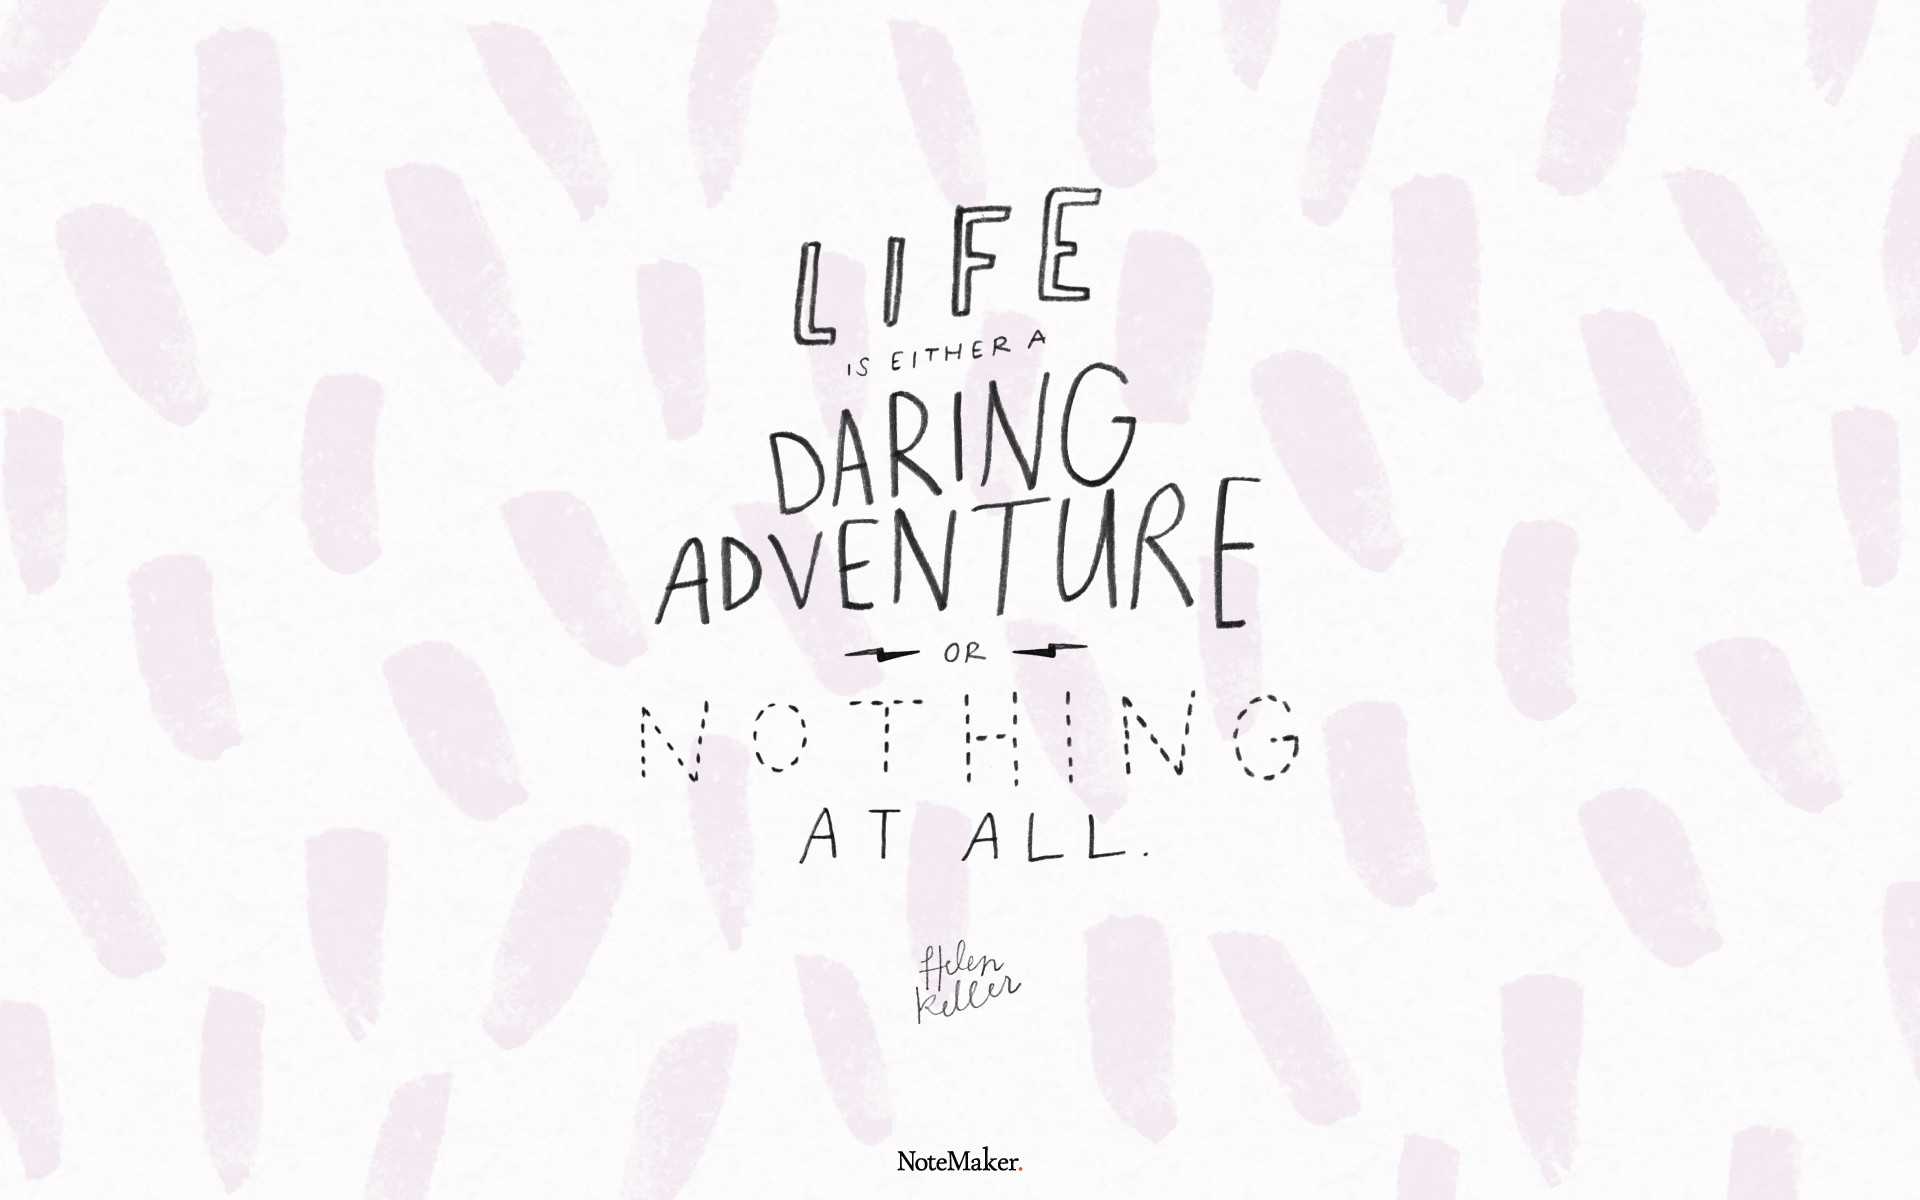 1920x1200 Inspirational quote: “Life is either a daring adventure or nothing at all.”  Helen Keller. inspirational quote desktop wallpaper